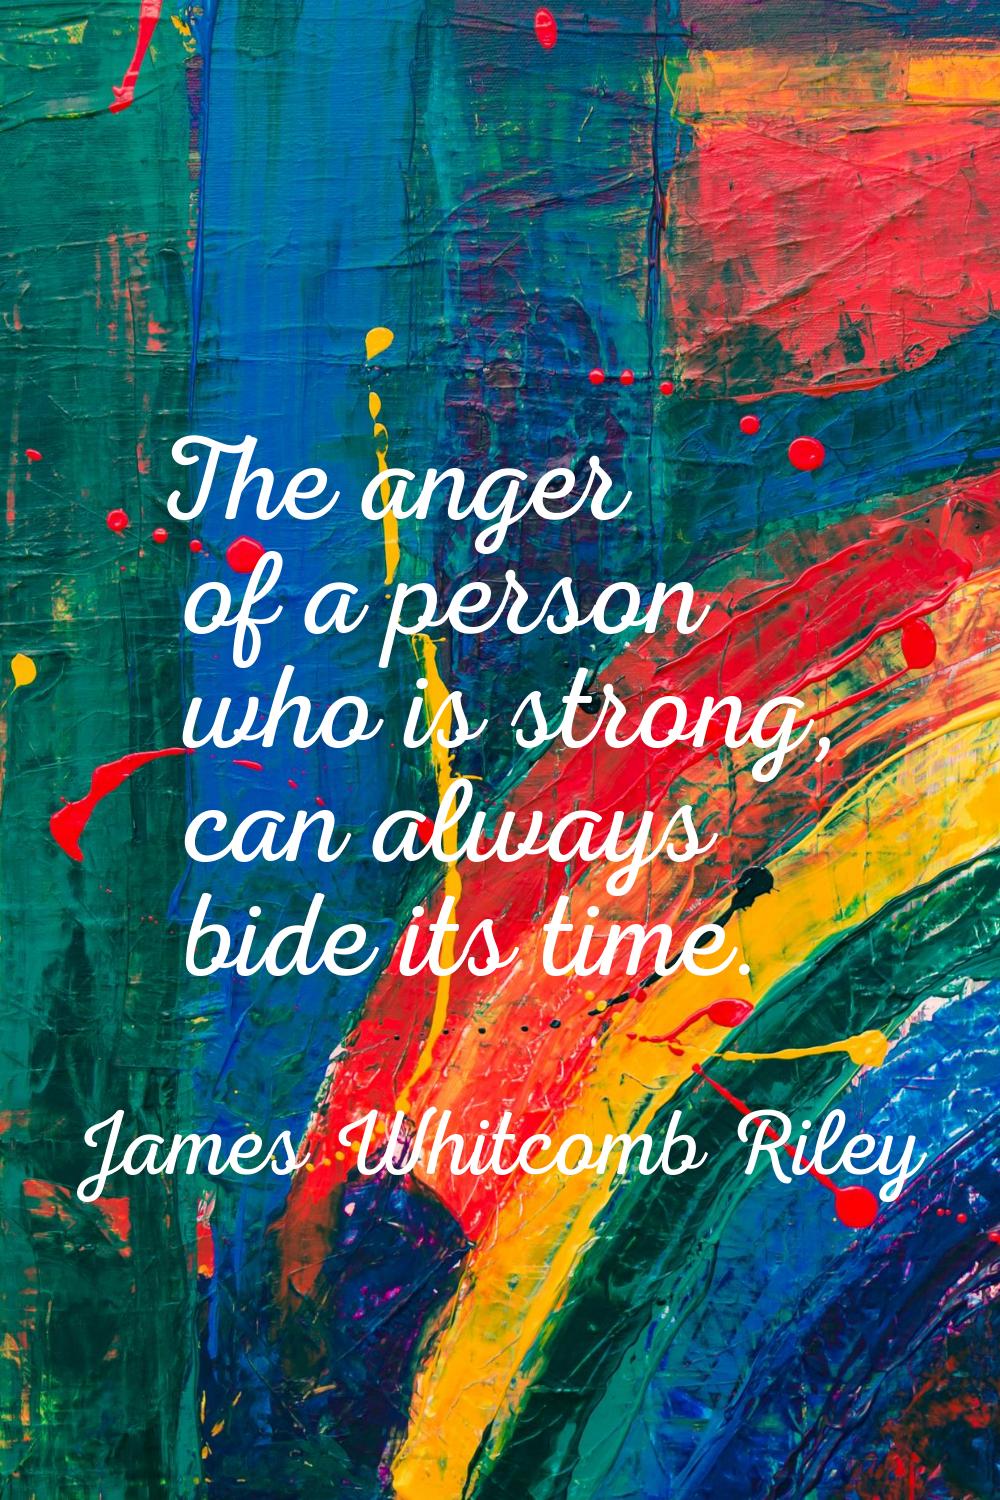 The anger of a person who is strong, can always bide its time.